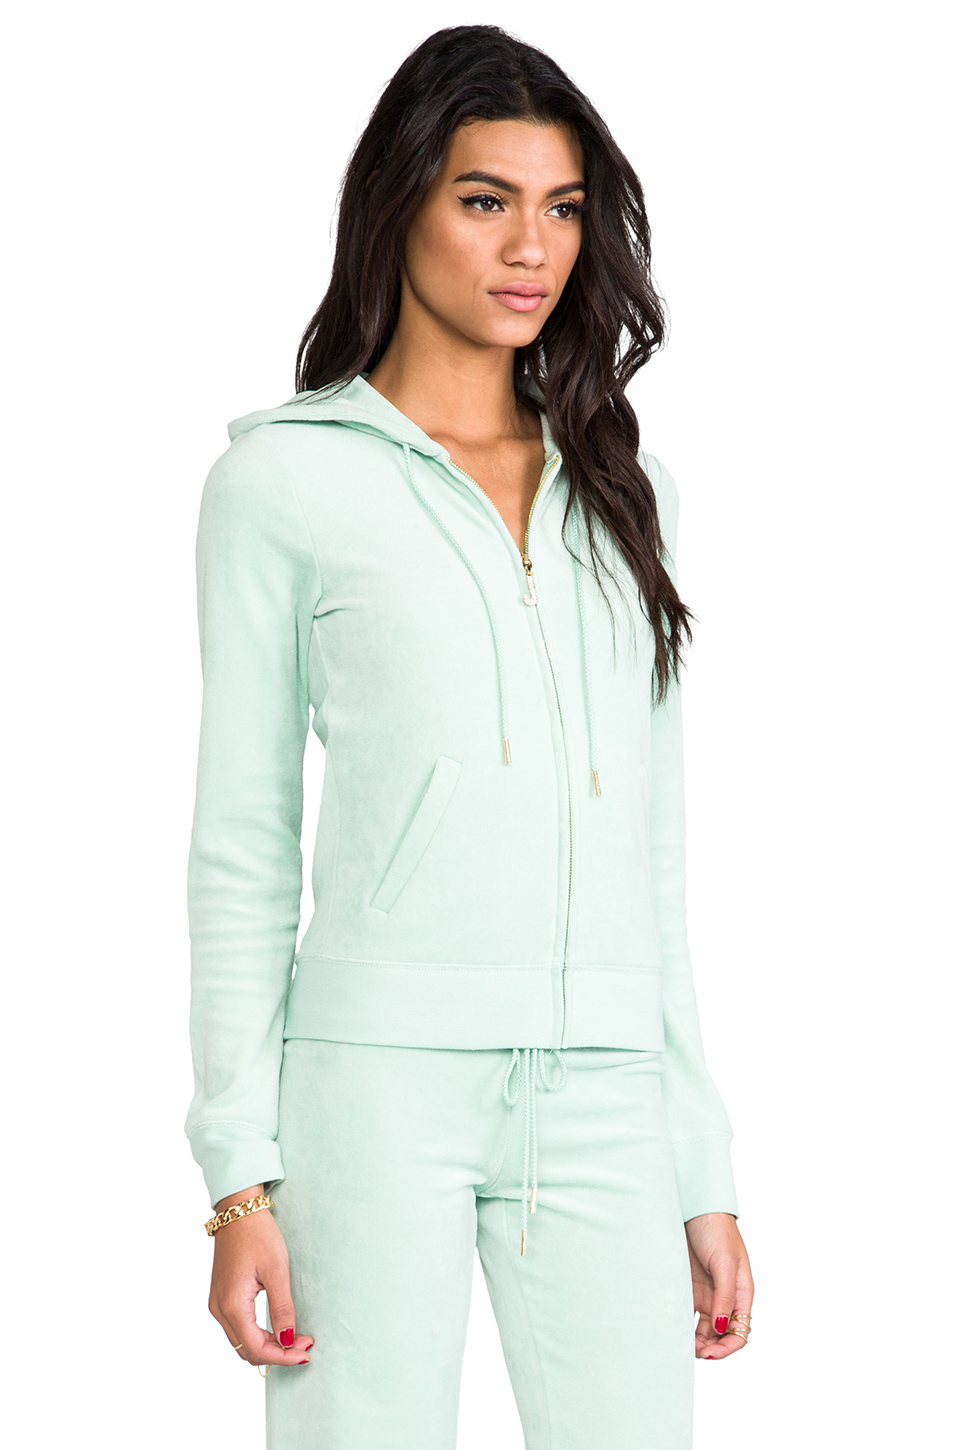 Juicy Couture J Bling Hoodie in Mint in Green - Lyst